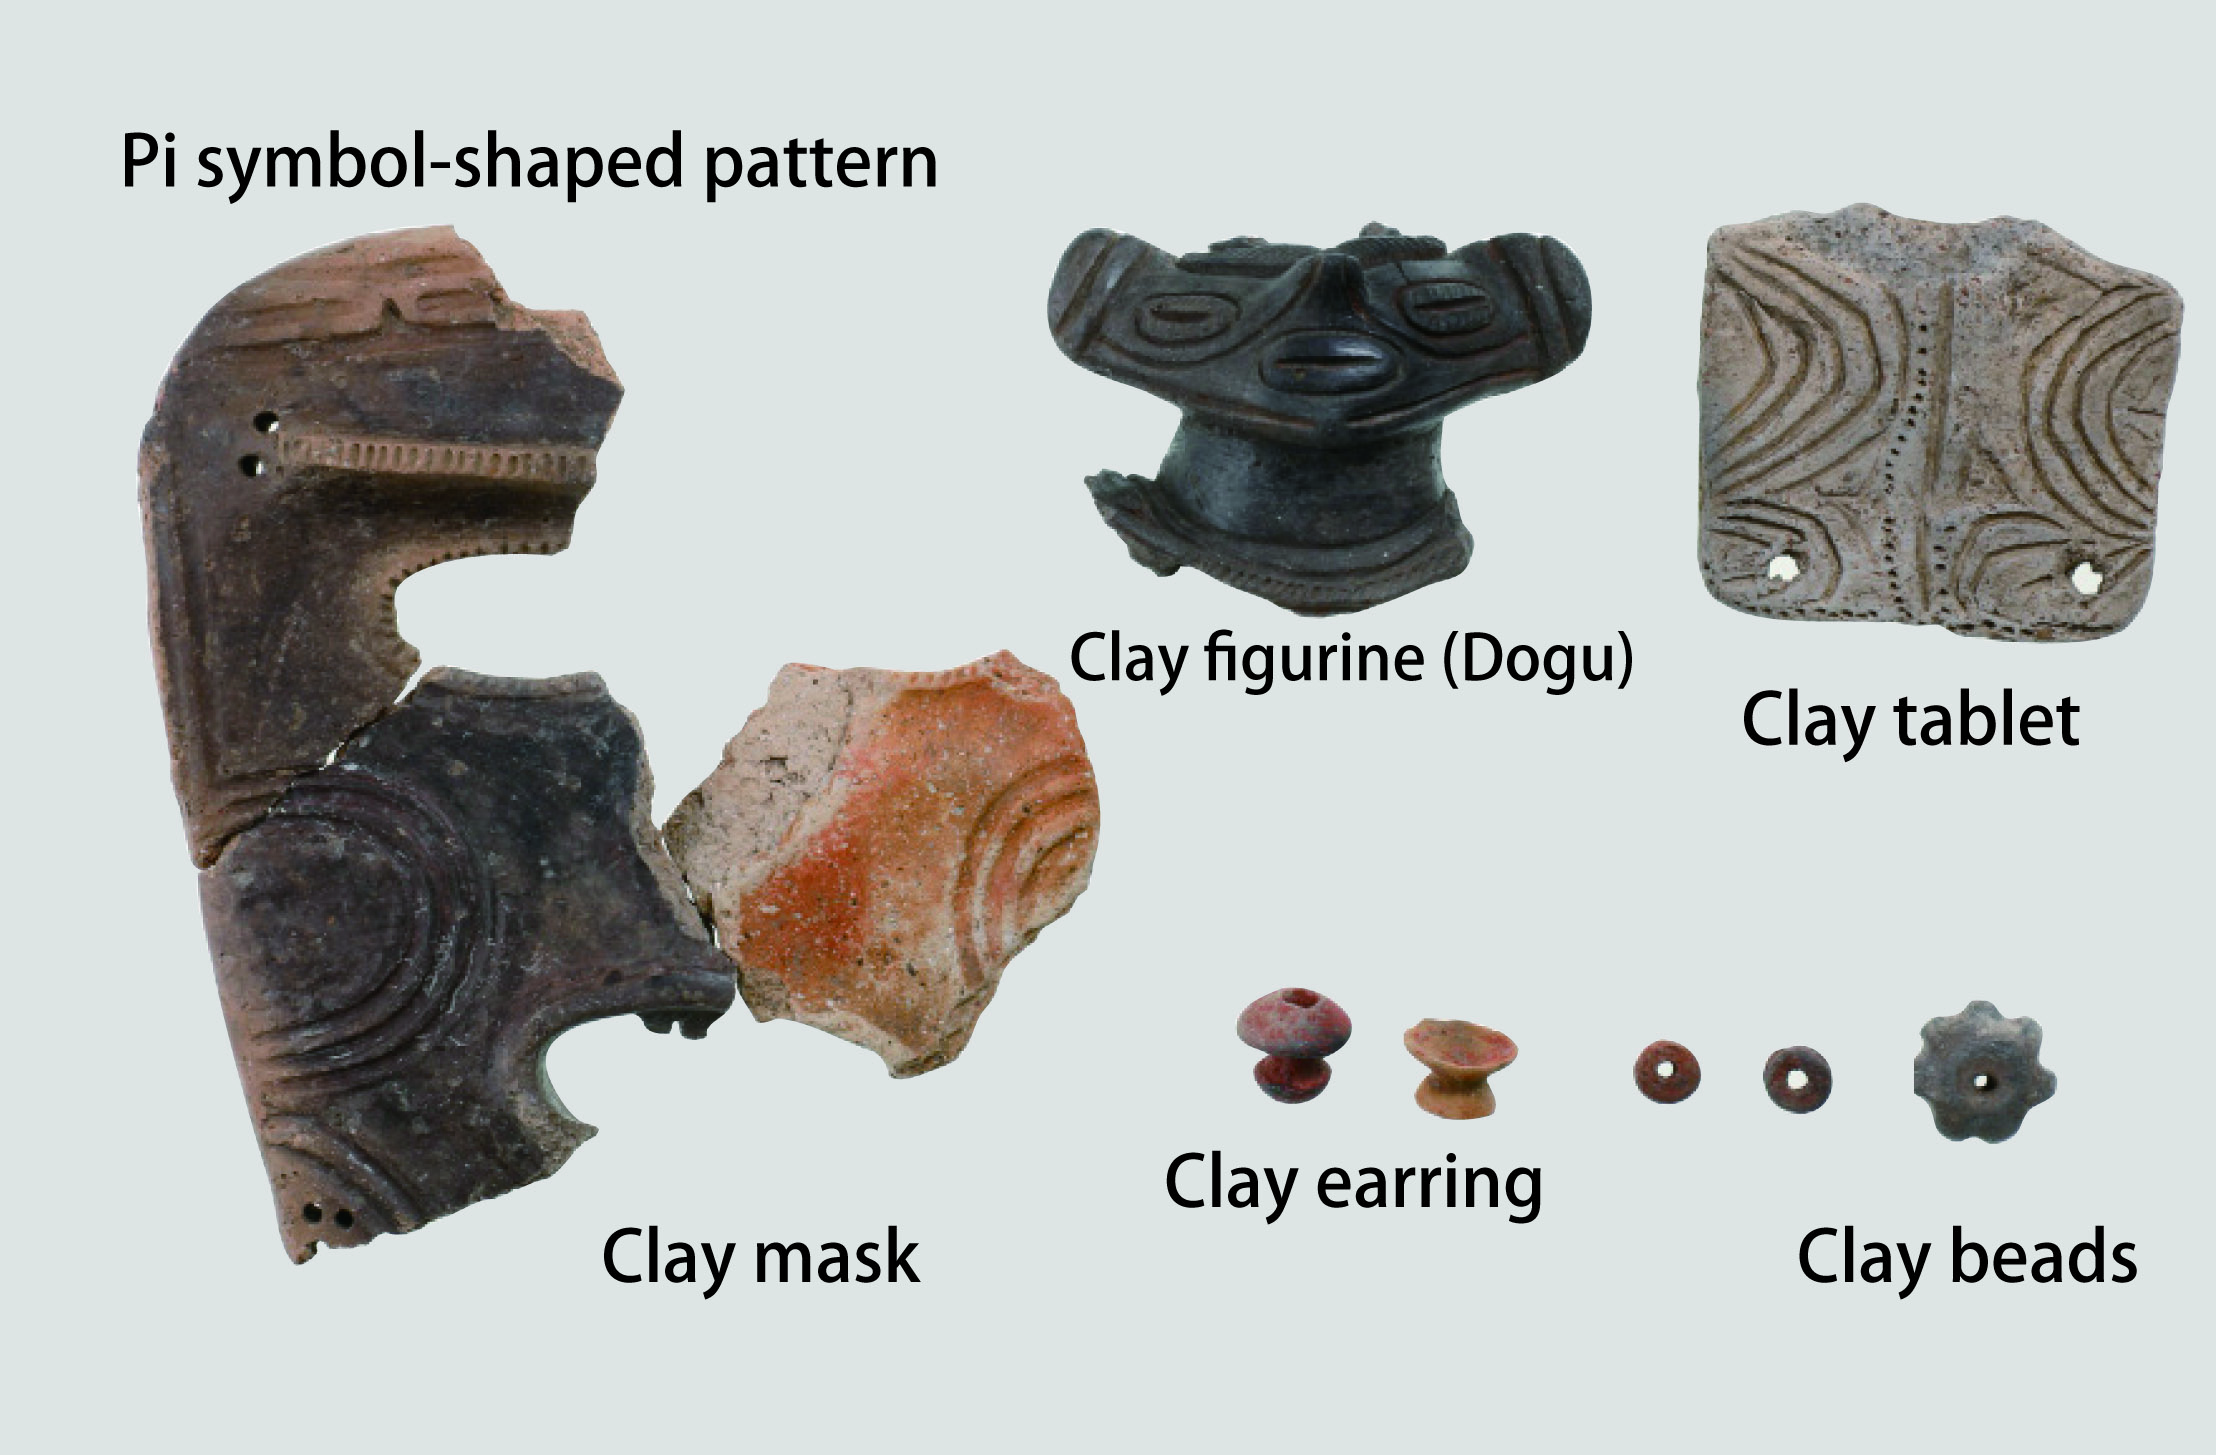 Clay implements excavated from the upper shell stratum